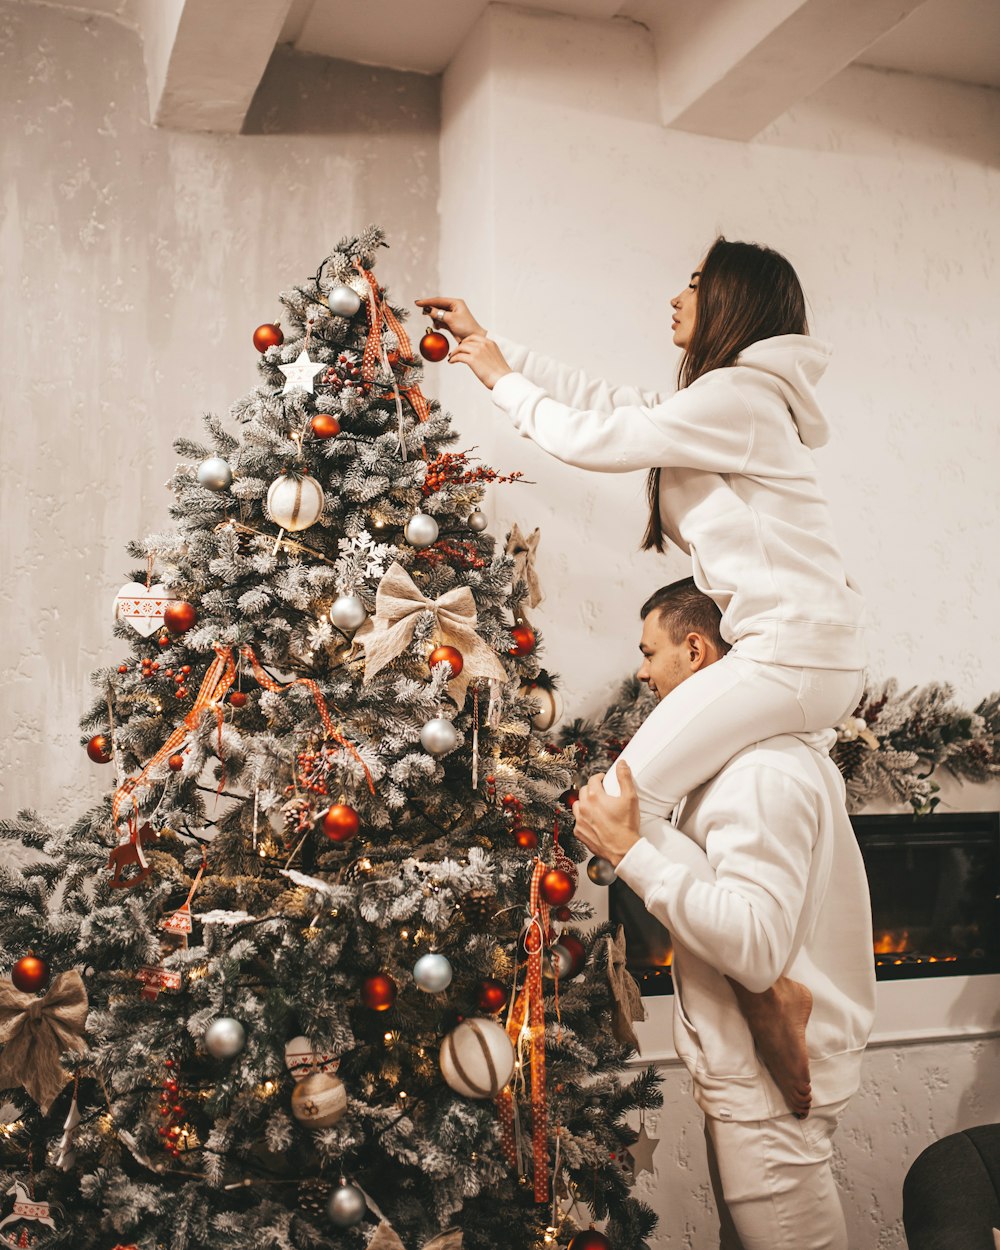 woman putting bauble on Christmas tree